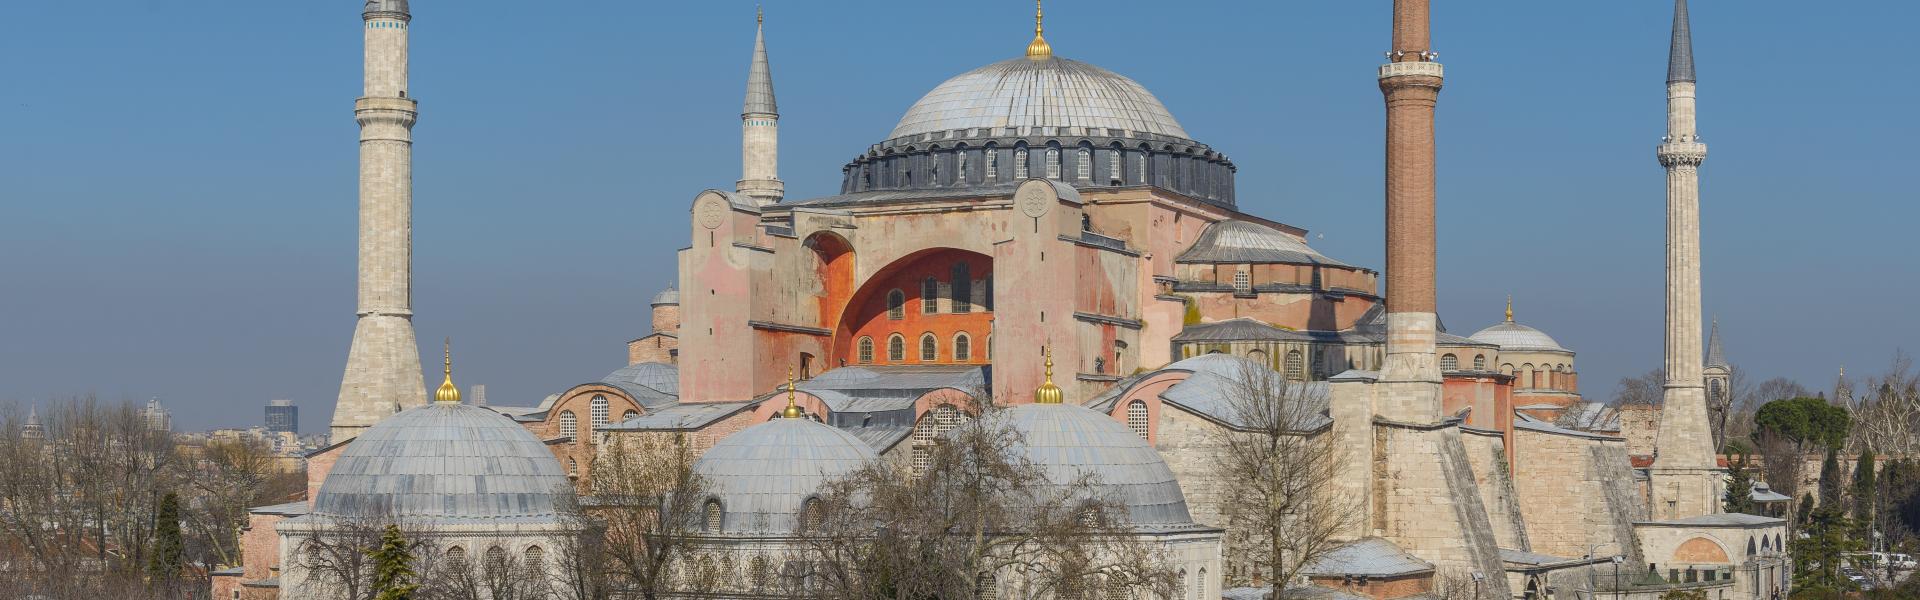 "It was a big mistake to change Hagia Sophia’s name into a museum"